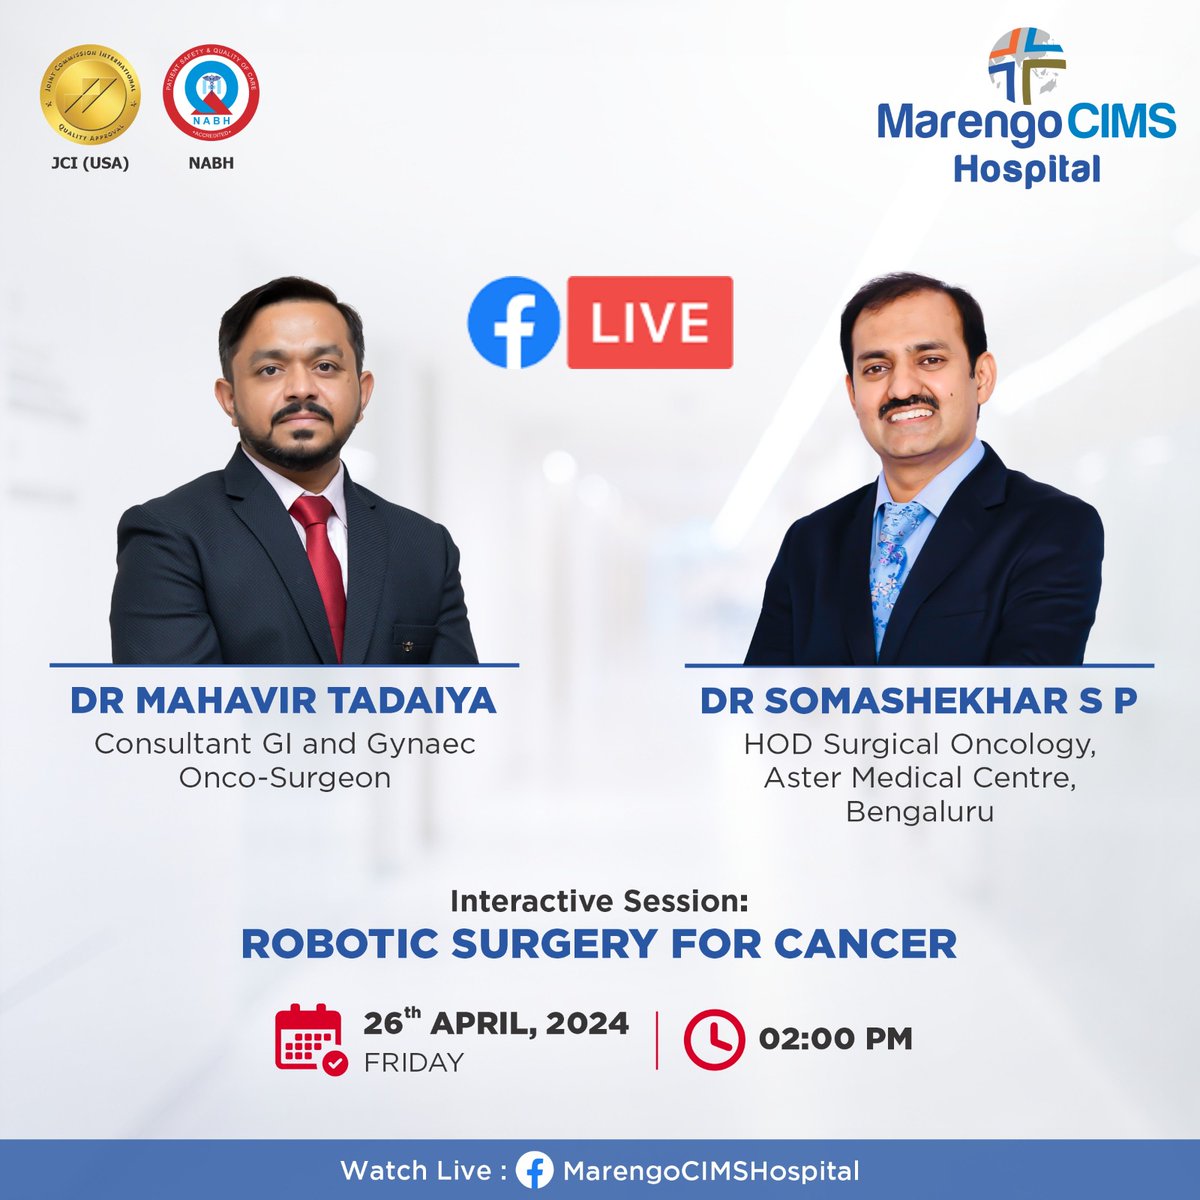 Live Panel Discussion on “Robotic Surgery for Cancer” with Dr. Mahavir Tadaiya & Dr. Somashekhar S P, will be on Friday, April 26, 2024, at 02:00 pm

Click to join: facebook.com/MarengoCIMSHos…
#MarengoCIMS #RoboticsSurgery #PatientFirst #CancerTreatment #CancerCare #MCIMSCancer